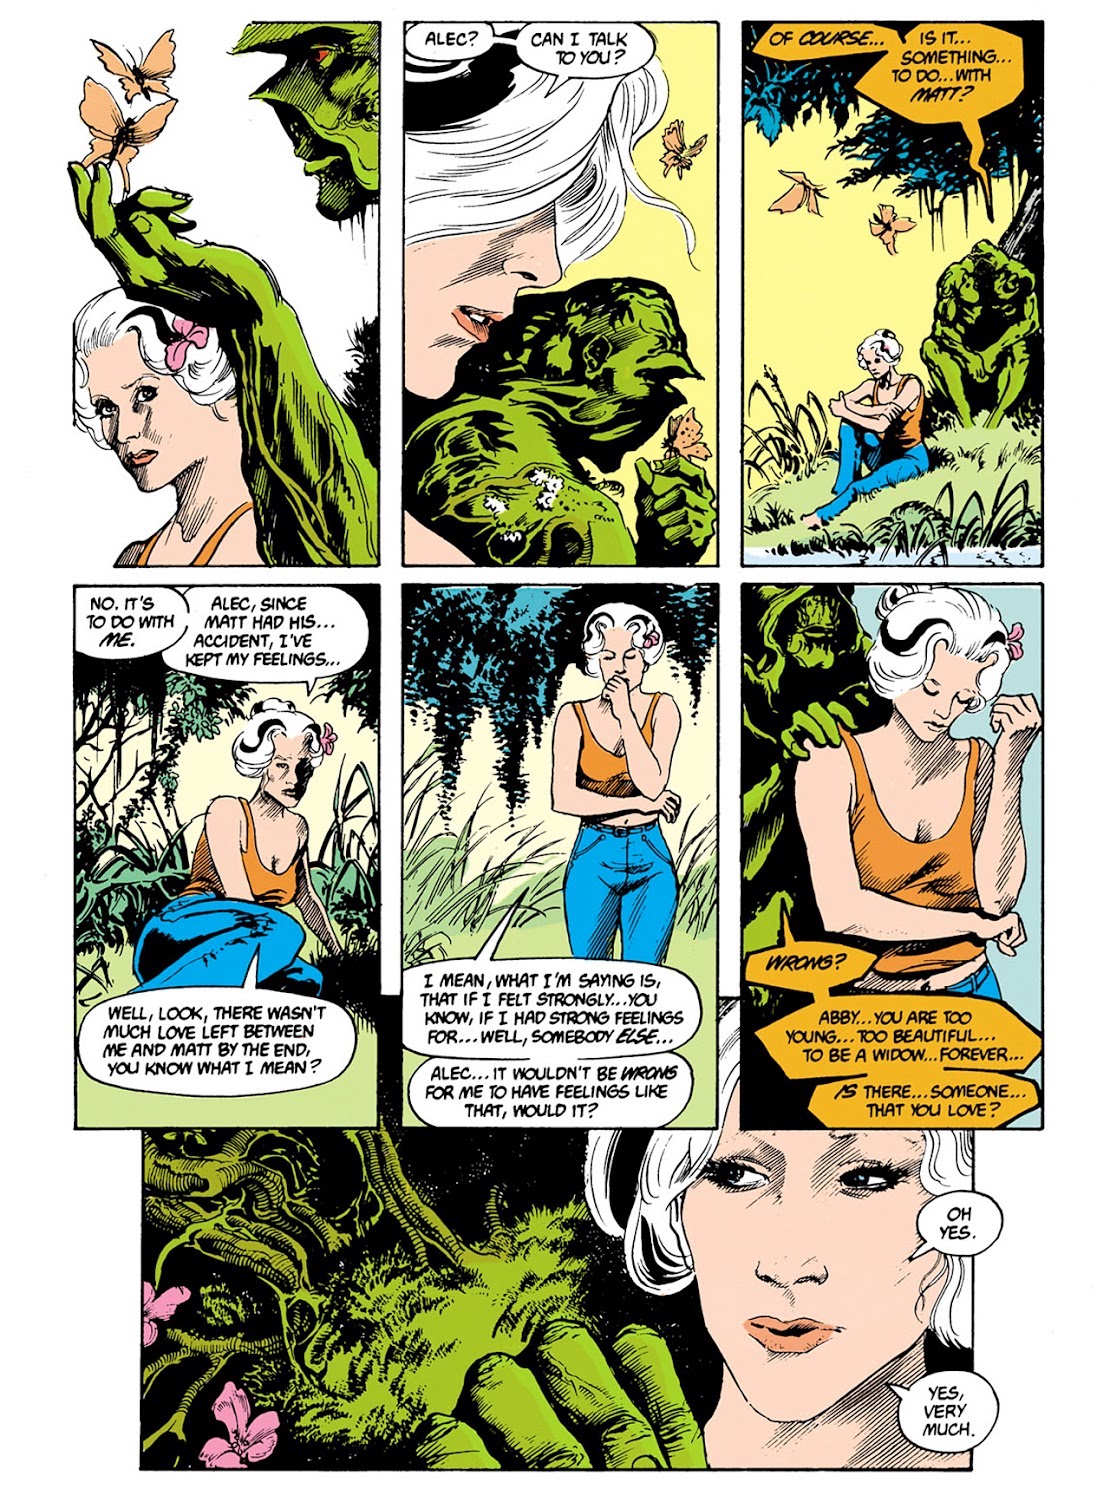 Swamp Thing #34 Might Be The Most Erotic, Sex-Positive Comic Book Of All Time